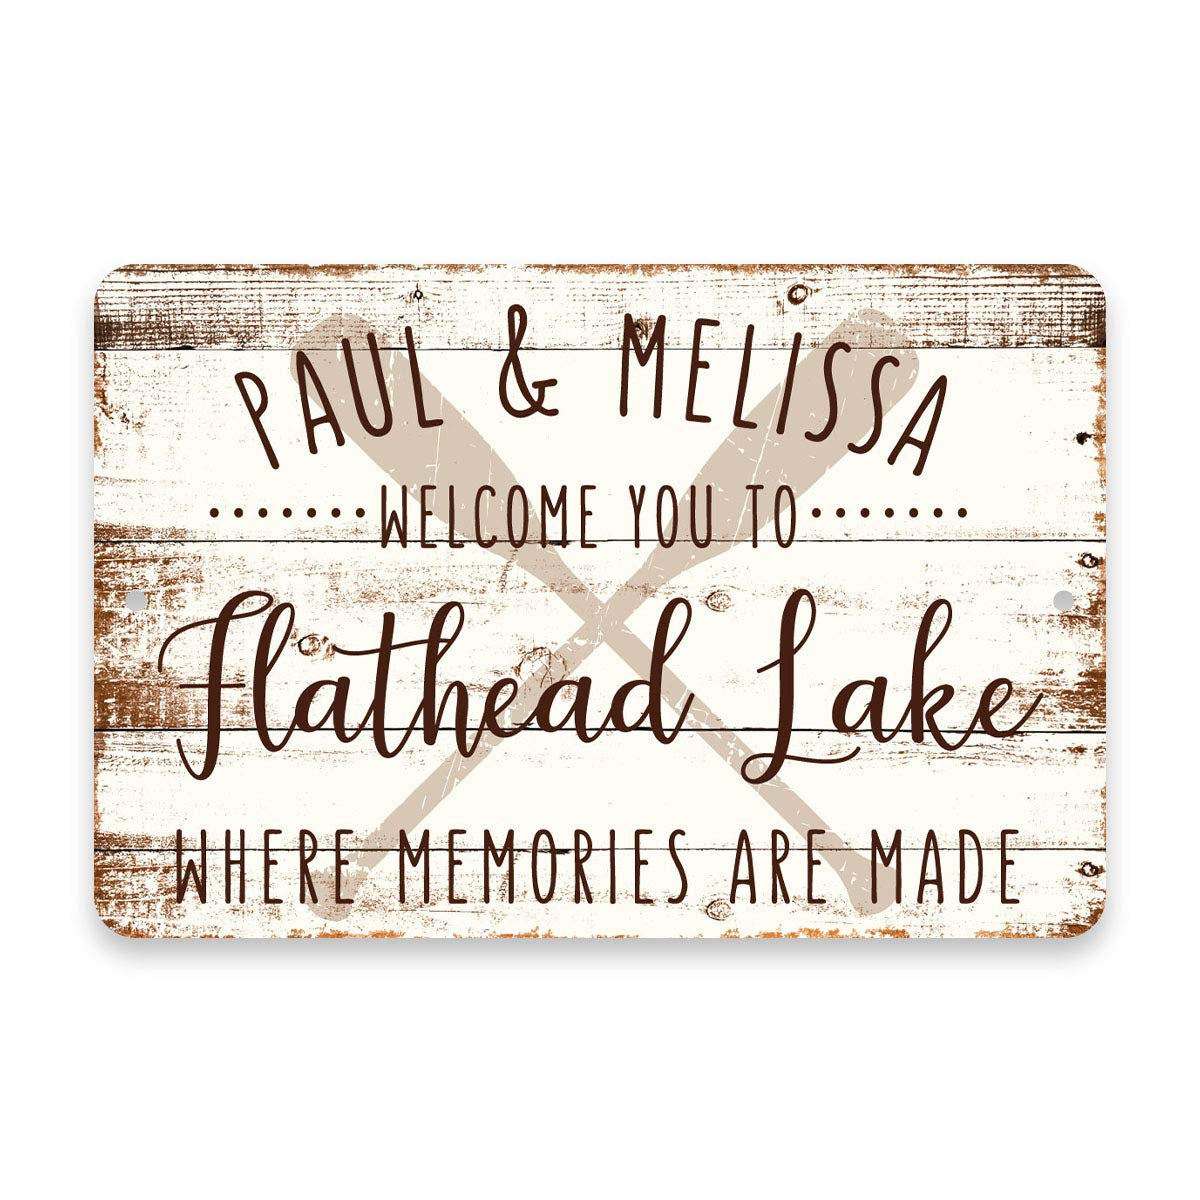 Personalized Welcome to Flathead Lake Where Memories are Made Sign - 8 X 12 Metal Sign with Wood Look